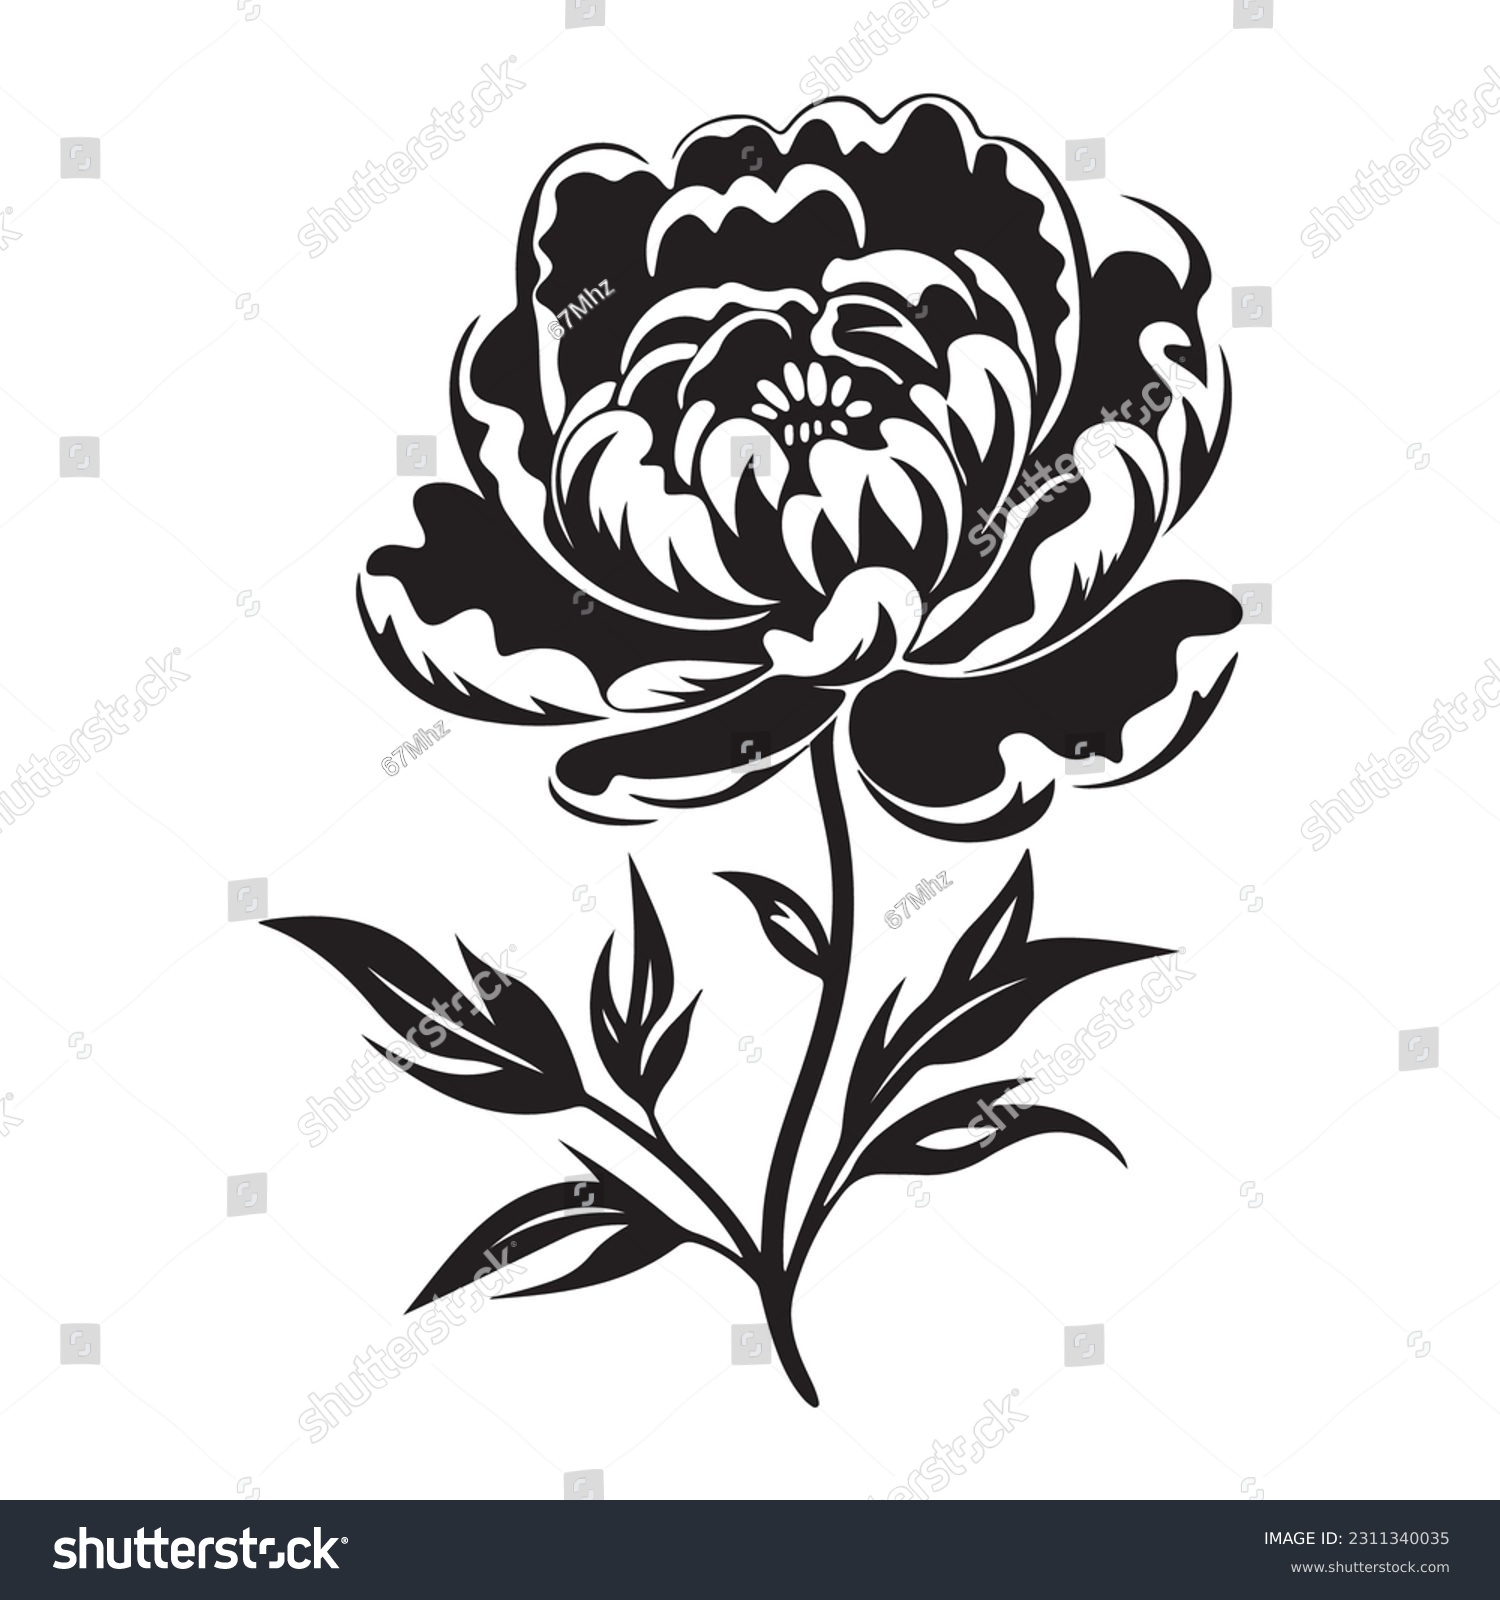 SVG of Peony flower , black sillouette, lines thick and connected. Park and garden flowers svg